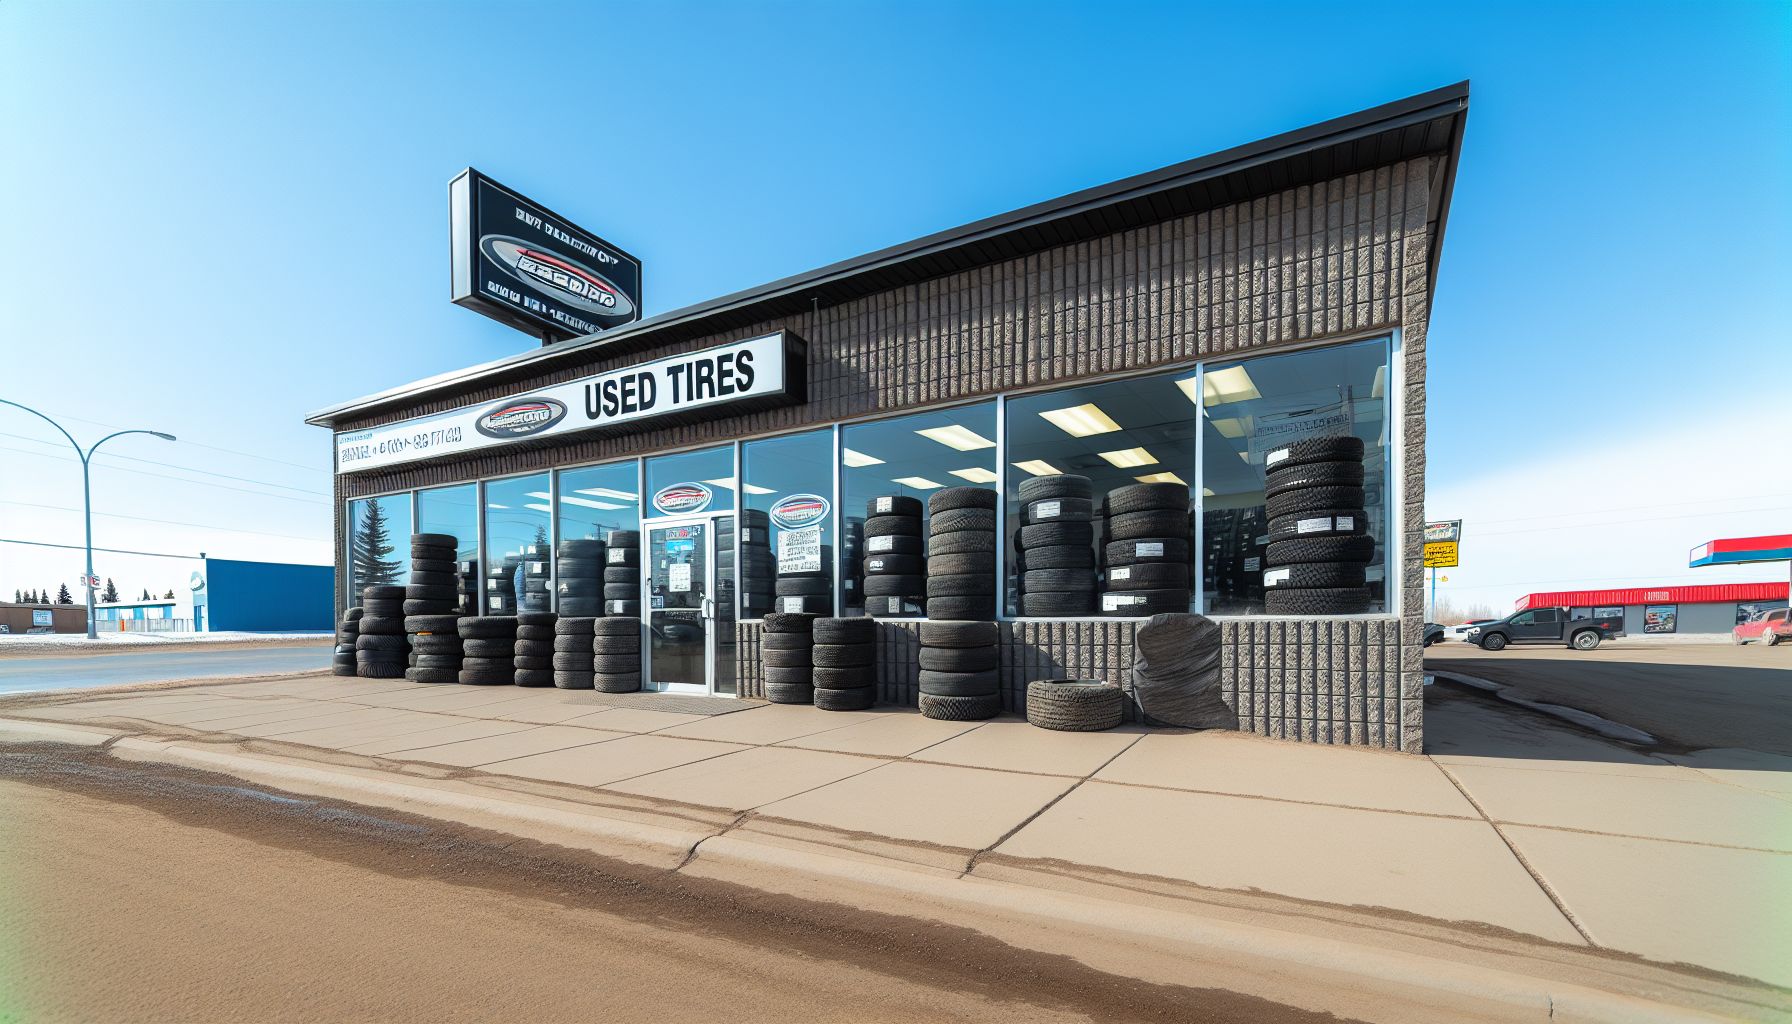 Reputable used tire shop exterior